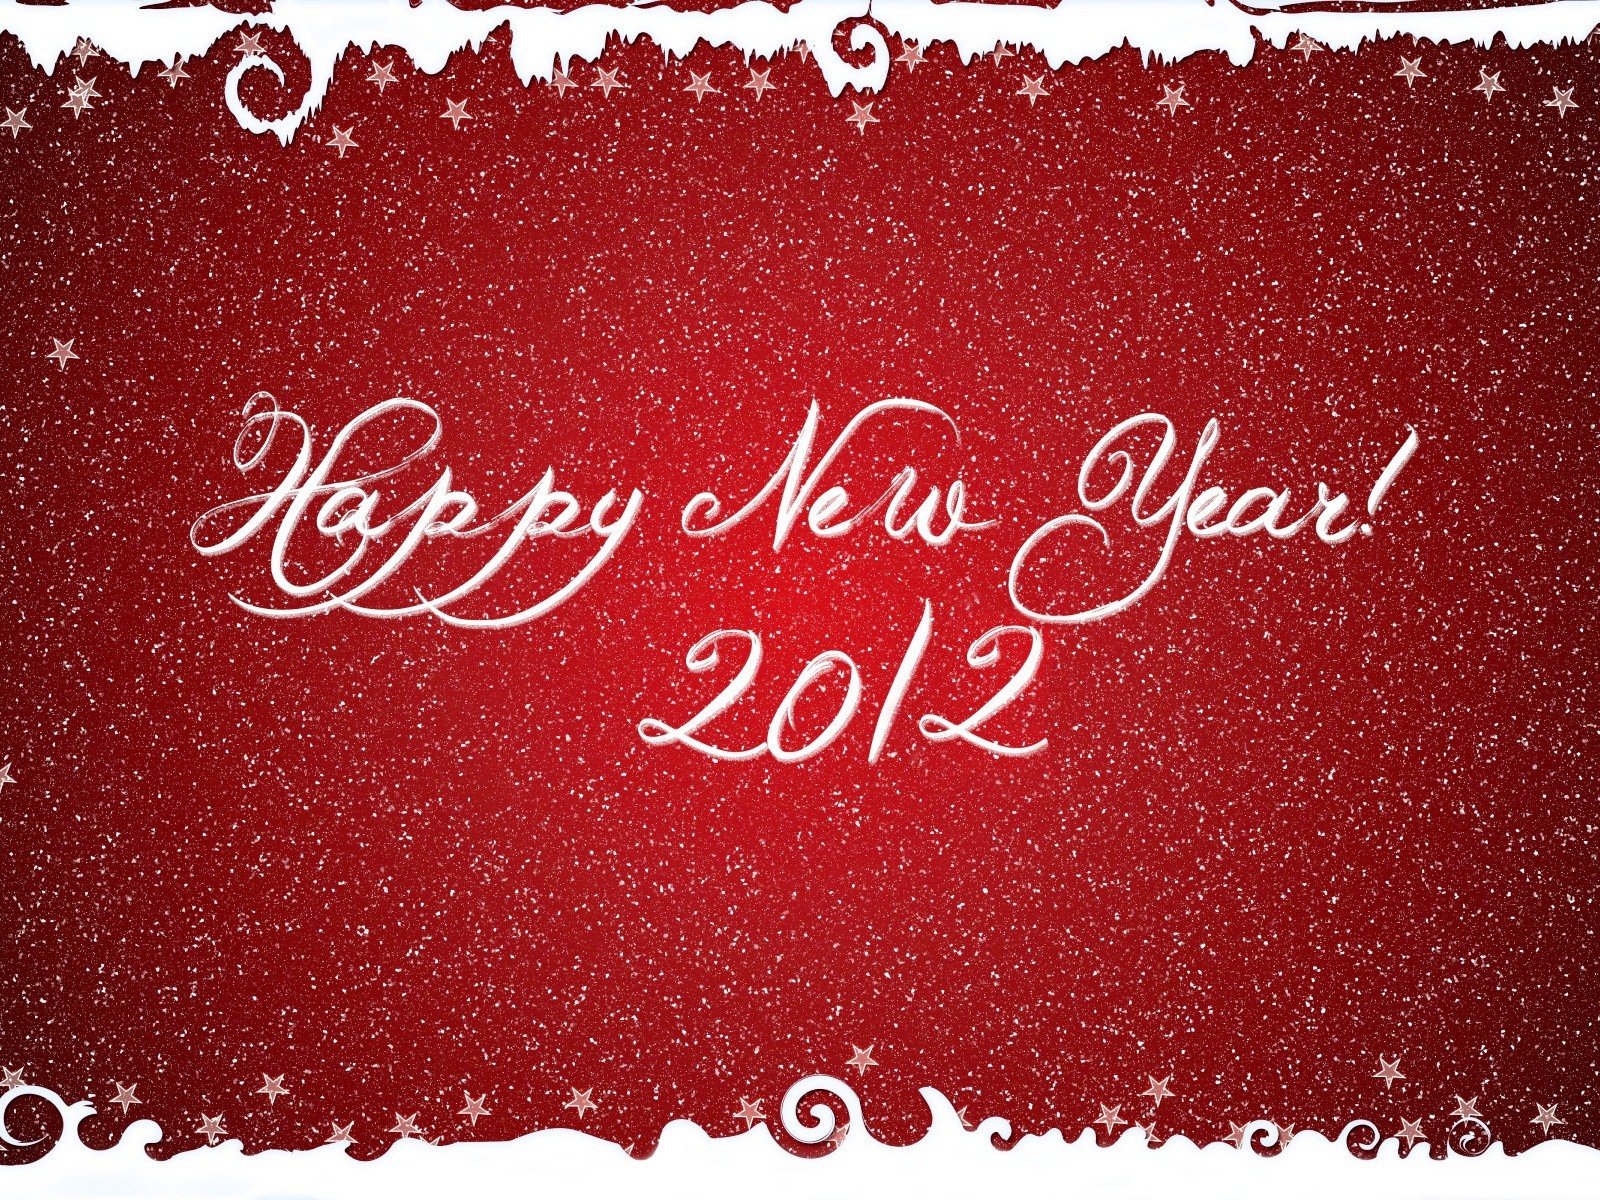 2012 New Year wallpapers (2) #6 - 1600x1200